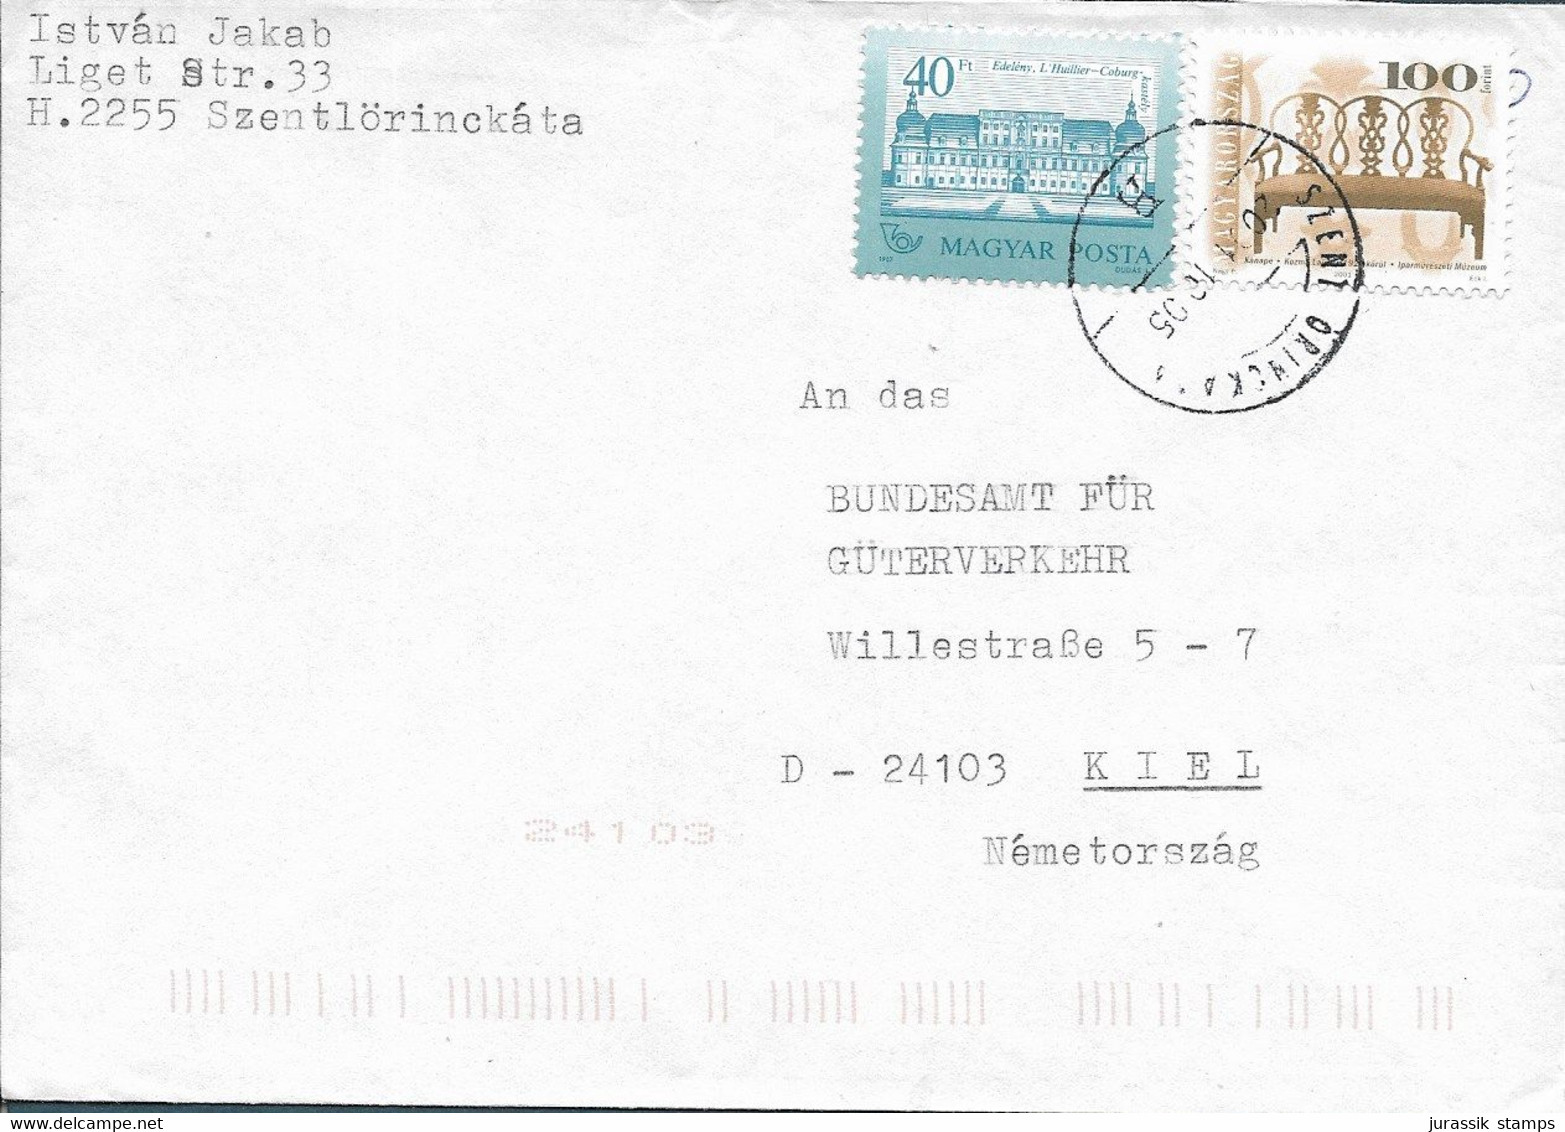 HUNGARY    - NICE  COVER TO GERMANY  -  1355 - Covers & Documents